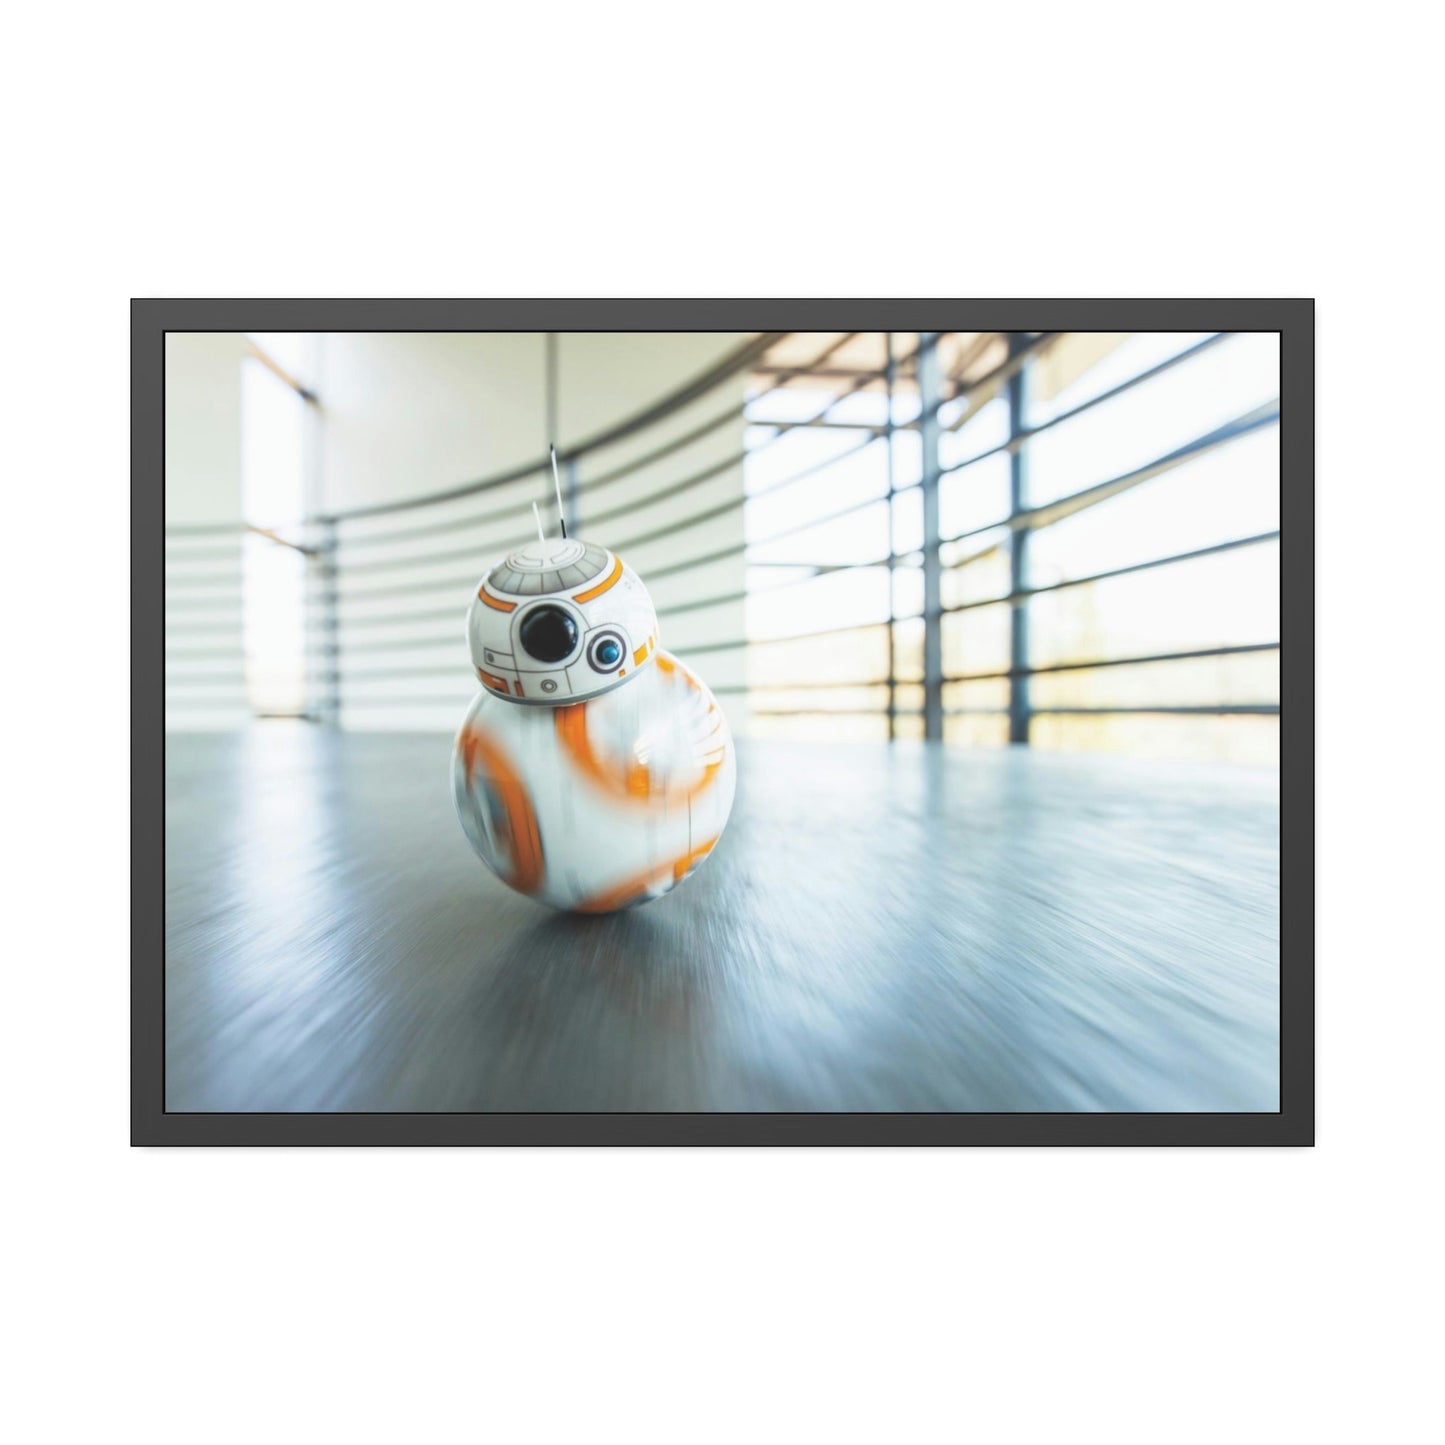 The Droid Chronicles: Framed Canvas & Poster Art Depicting the Star Wars Robot's Story